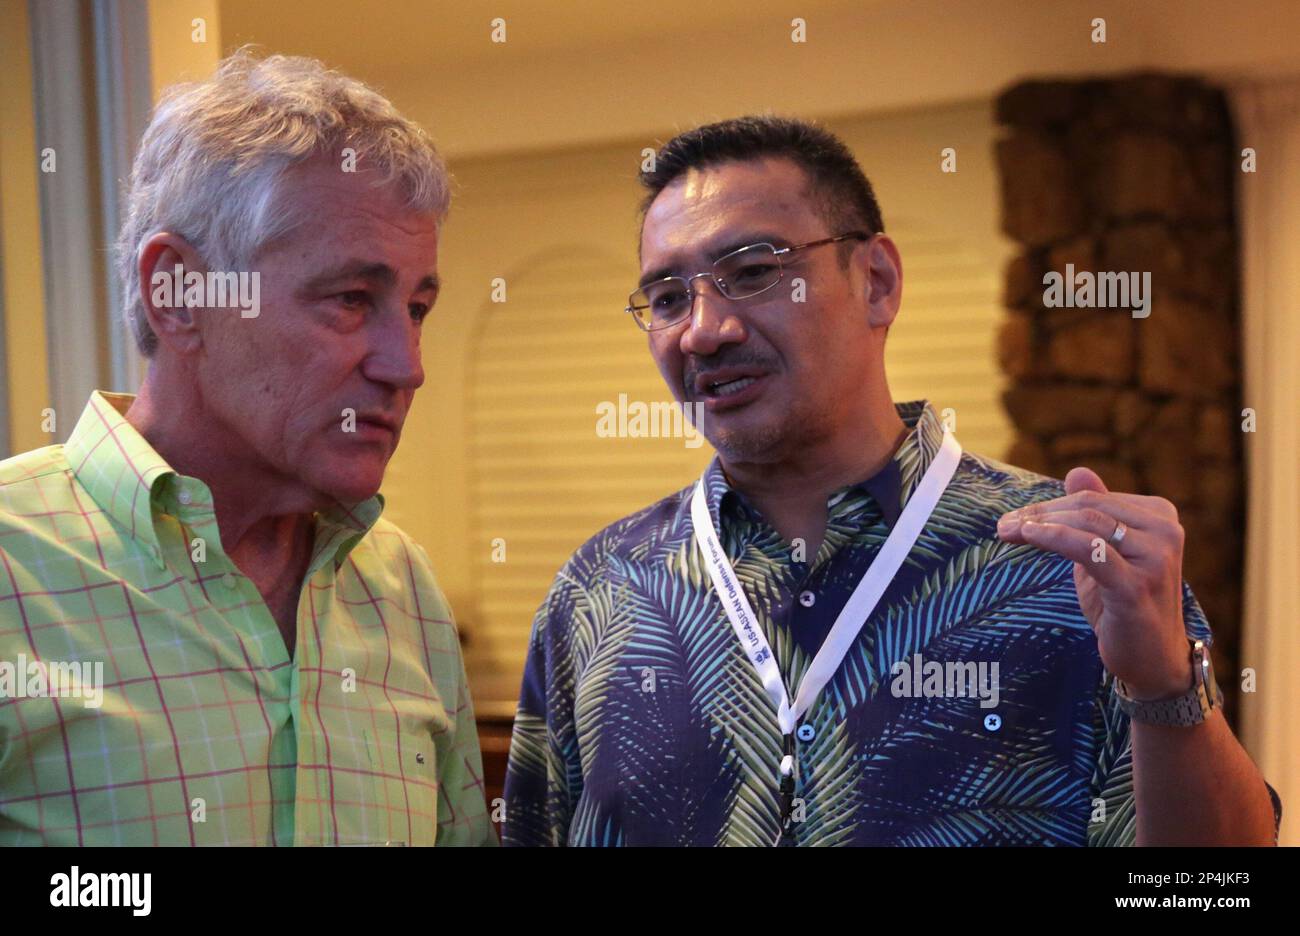 U.S. Secretary of Defense Chuck Hagel (L) listens to Malaysian Defence Minister and acting transport minister Hishammuddin Hussein (R) during a welcoming reception for Southeast Asian defense ministers April 1, 2014 in Honolulu, Hawaii. Secretary Hagel is in Hawaii to host a meeting of defense ministers from the Association of Southeast Asian Nations (ASEAN) on April 1 to 3. (AP Photo/POOL, Alex Wong) Stock Photo